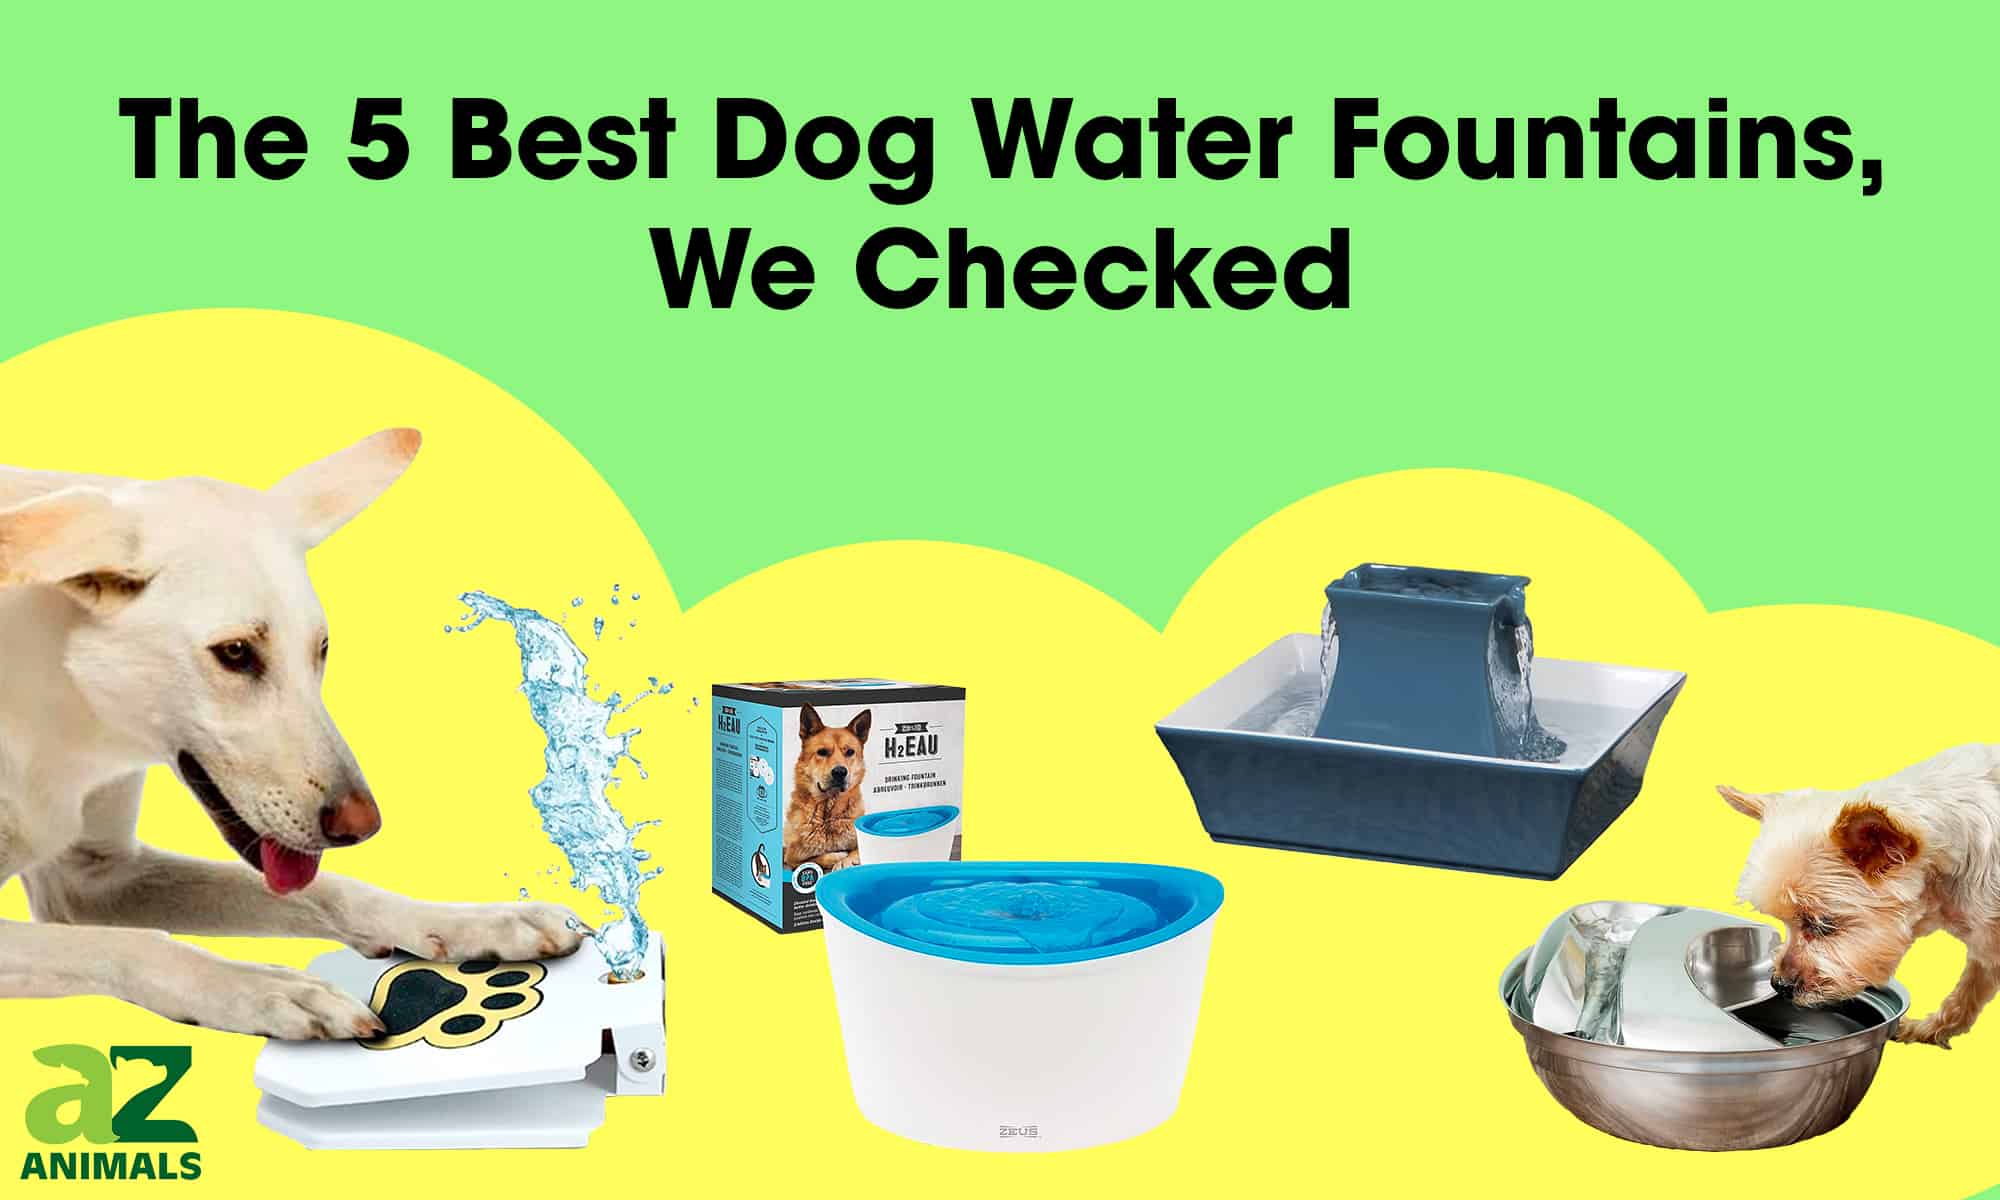 The 5 Best Dog Water Fountains, We Checked - AZ Animals